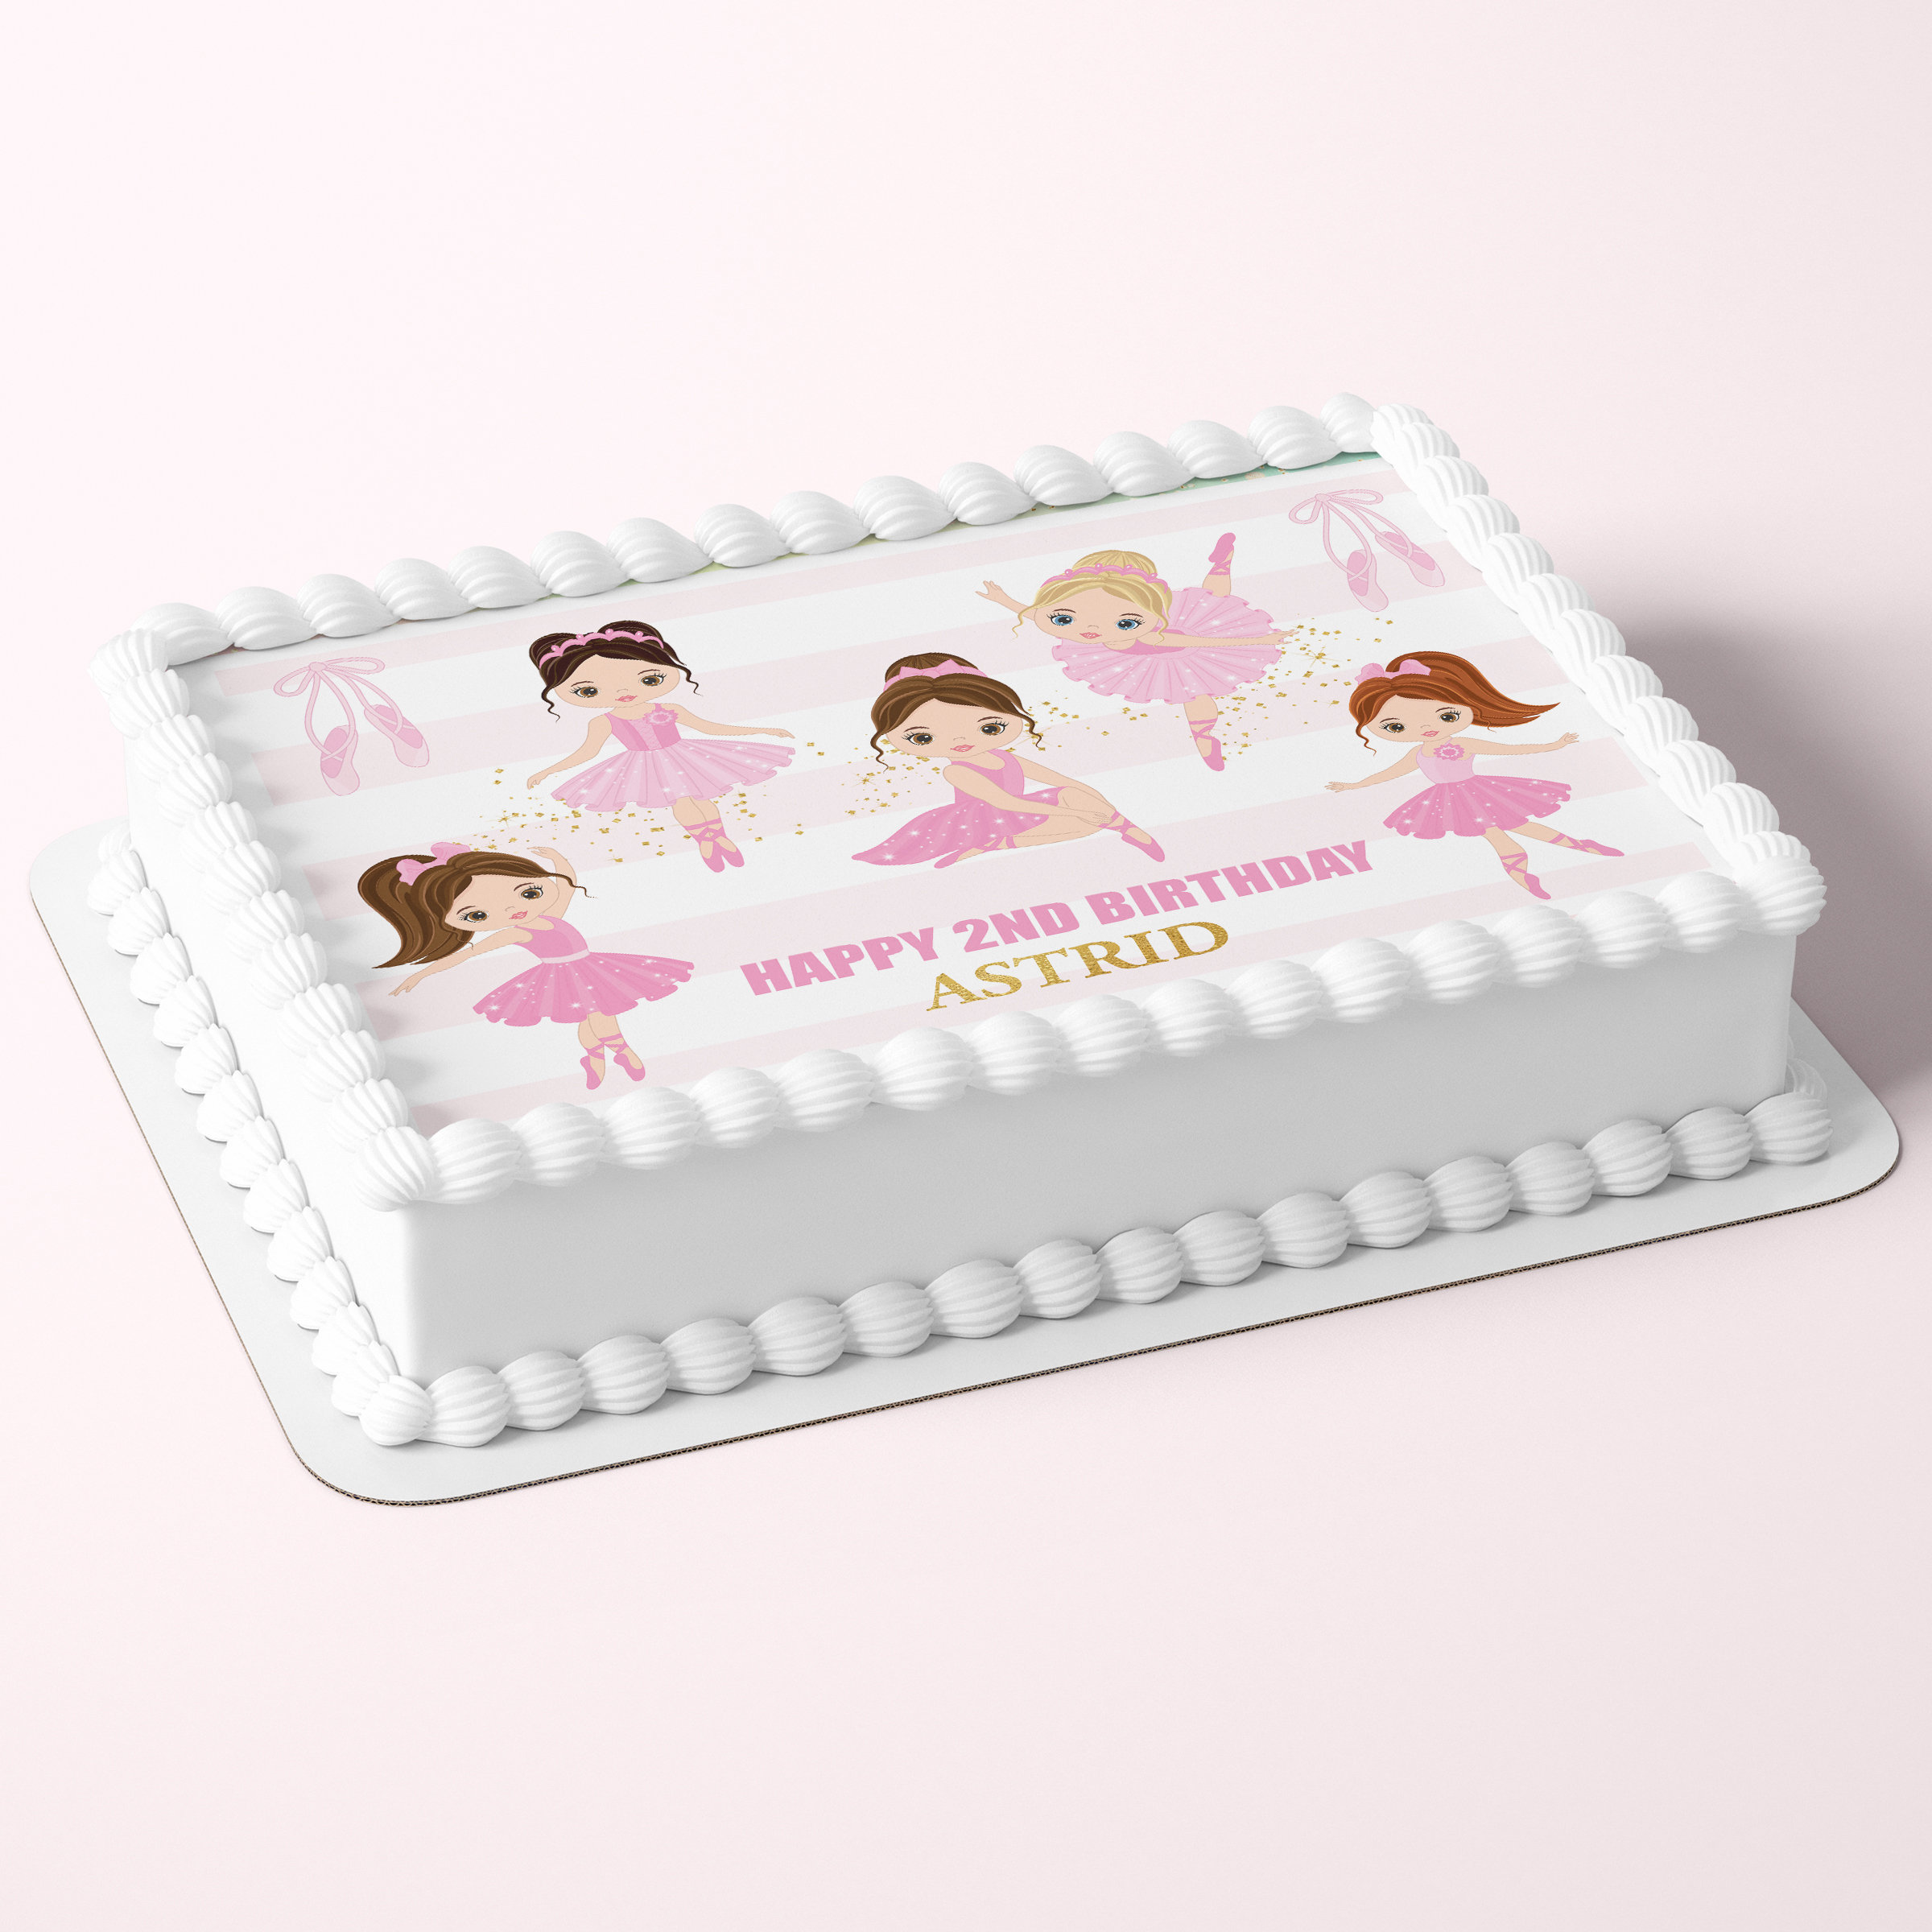 DISCO THEMED RECTANGLE EDIBLE CAKE TOPPER DECORATION PERSONALISED 